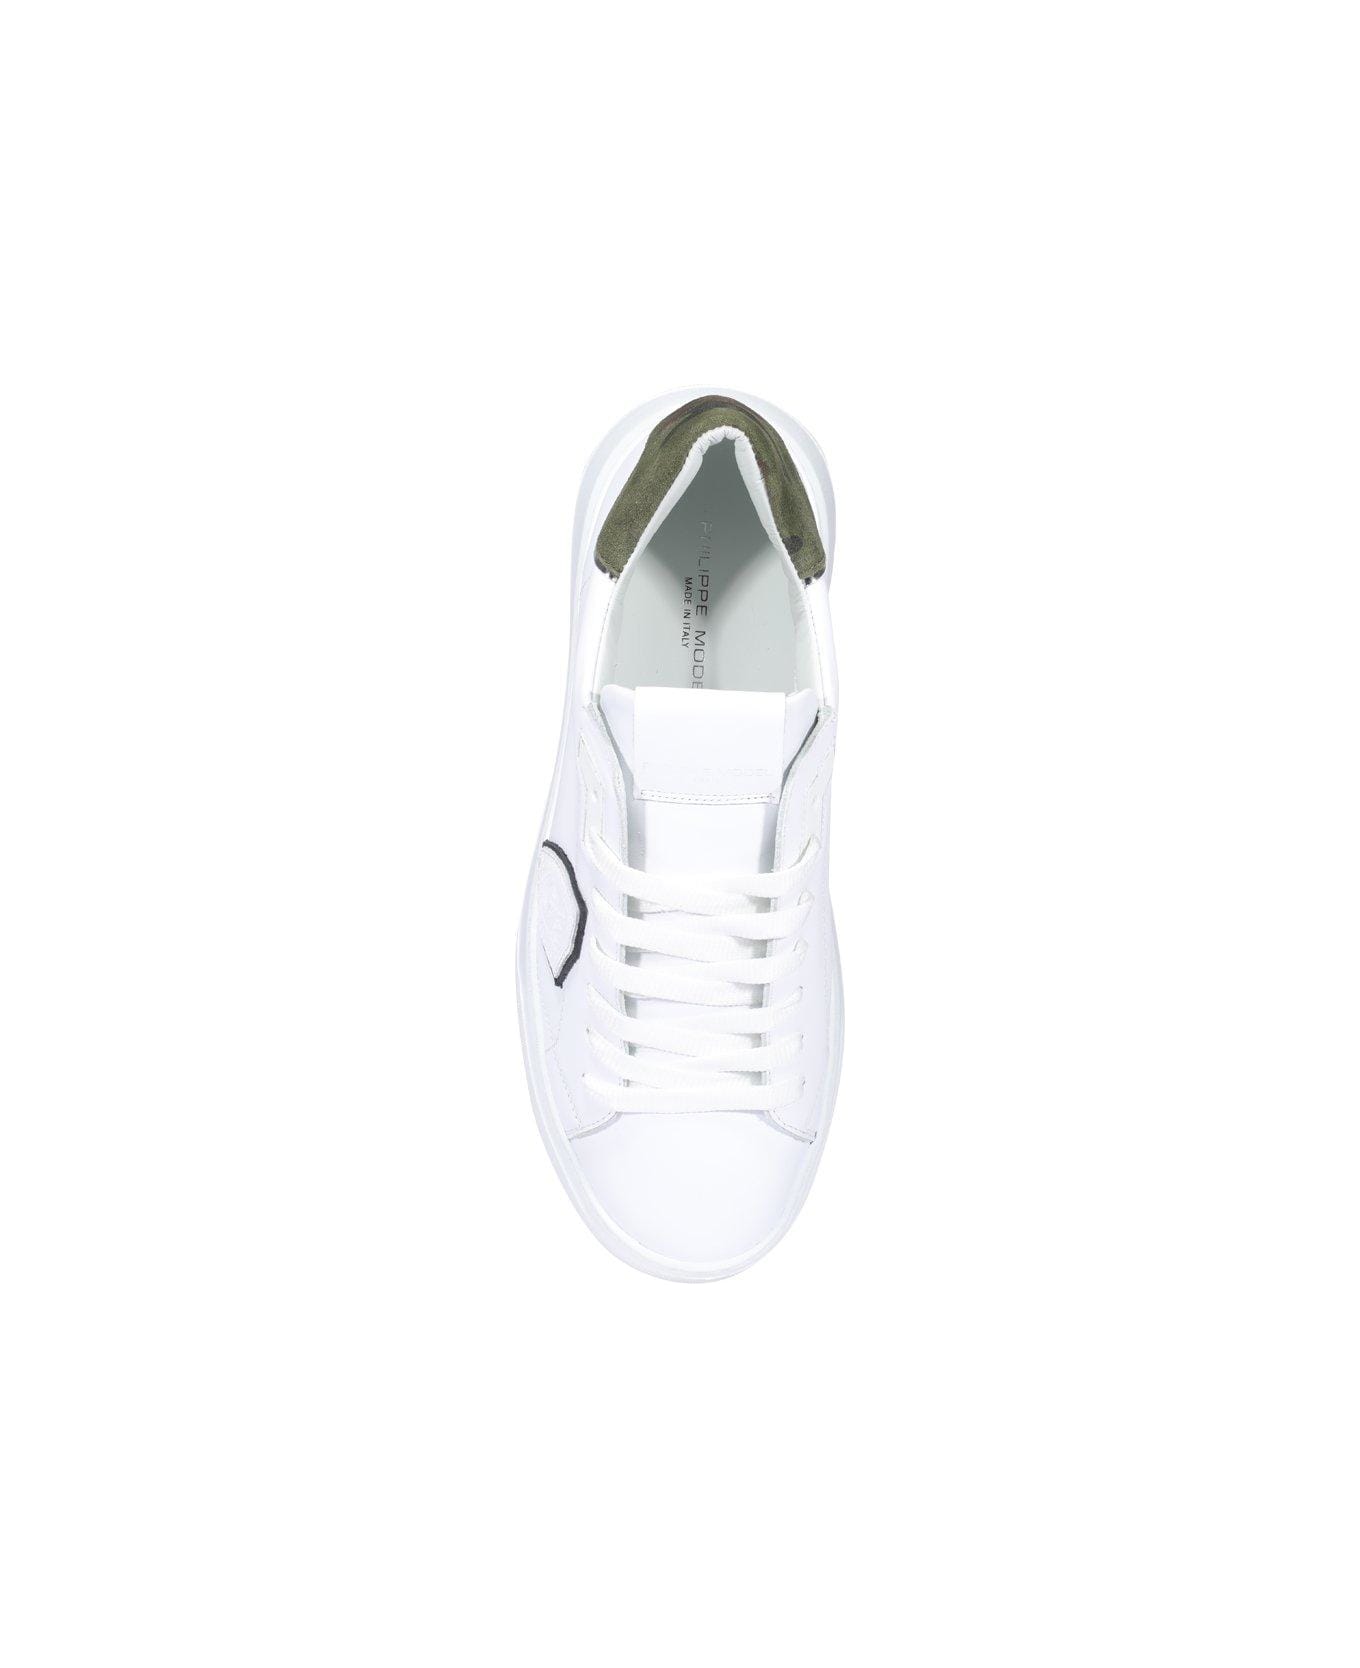 Philippe Model Temple Veau Camouflage Sneakers - Bianco e Verde